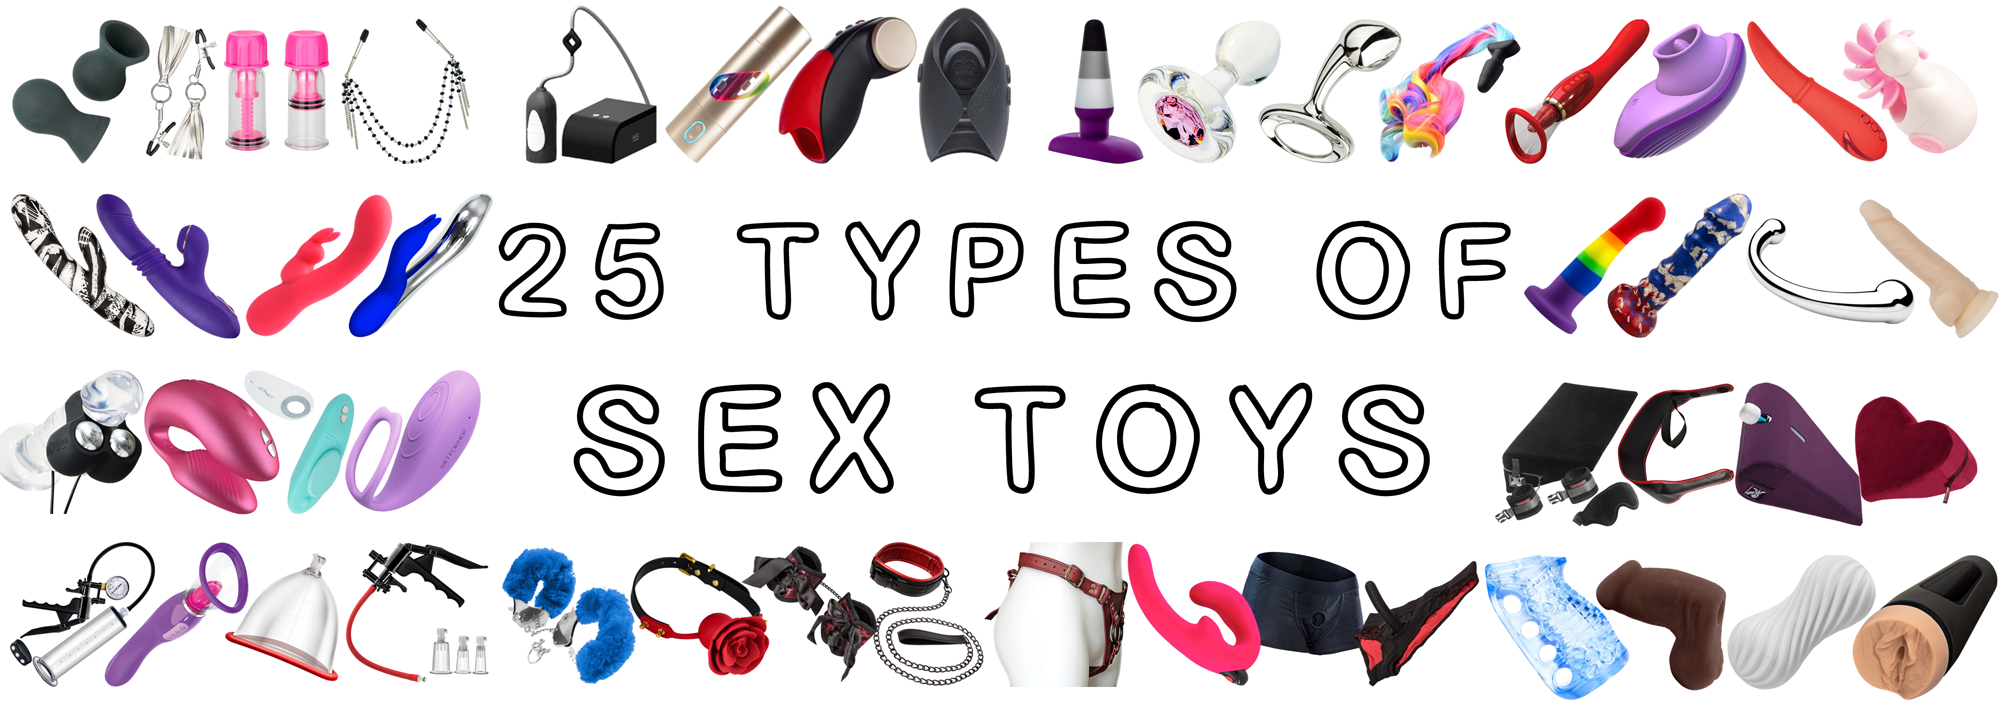 25 Types of Sex Toys A Guide to Help You Know Whats Out There pic